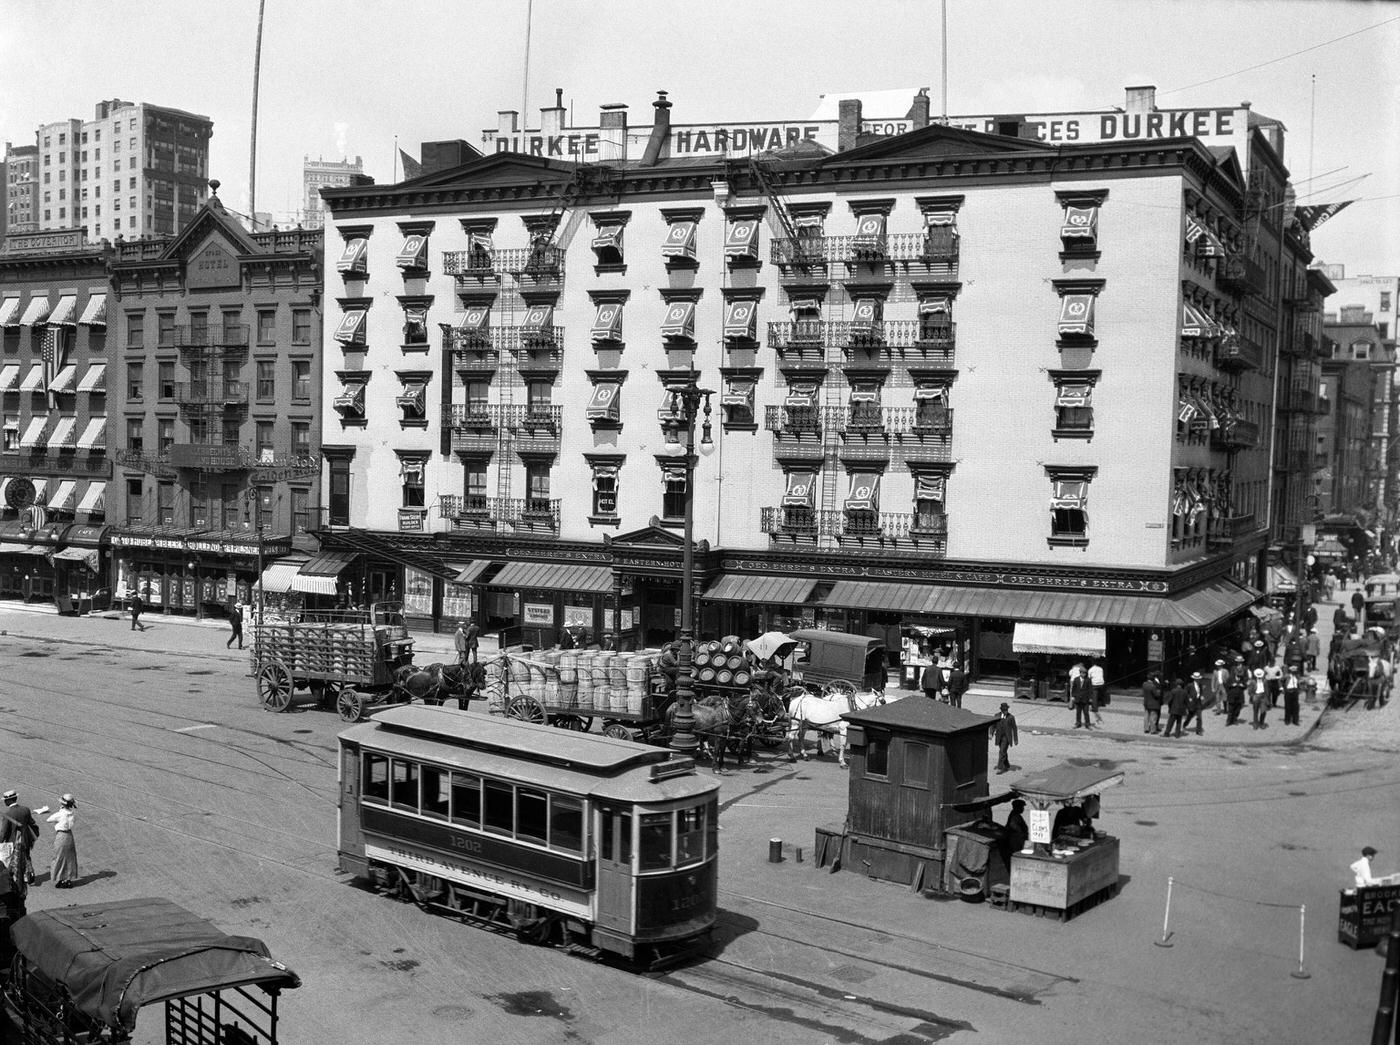 Eastern Hotel With An Edison Street Car At South Ferry, Lower Manhattan, New York City, 1916